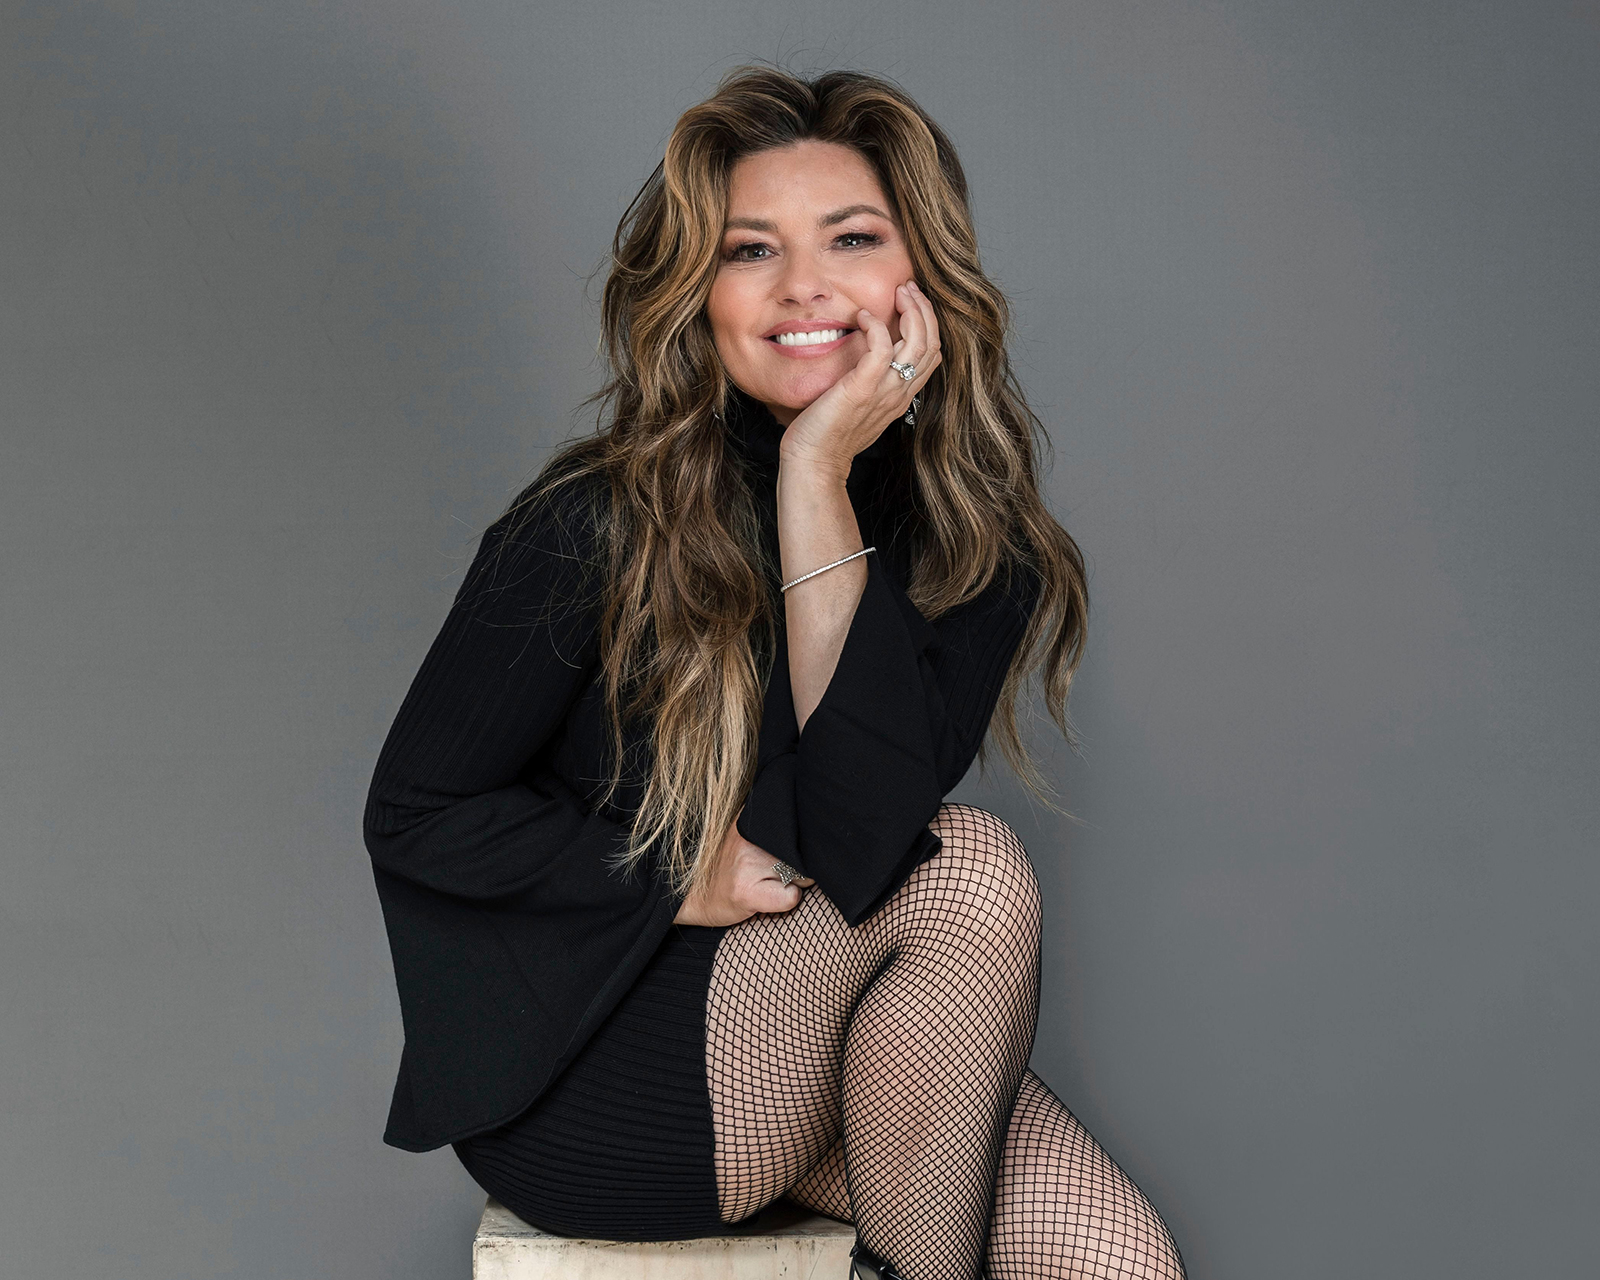 Shania Twain Transformation Gallery See Photos Then and Now